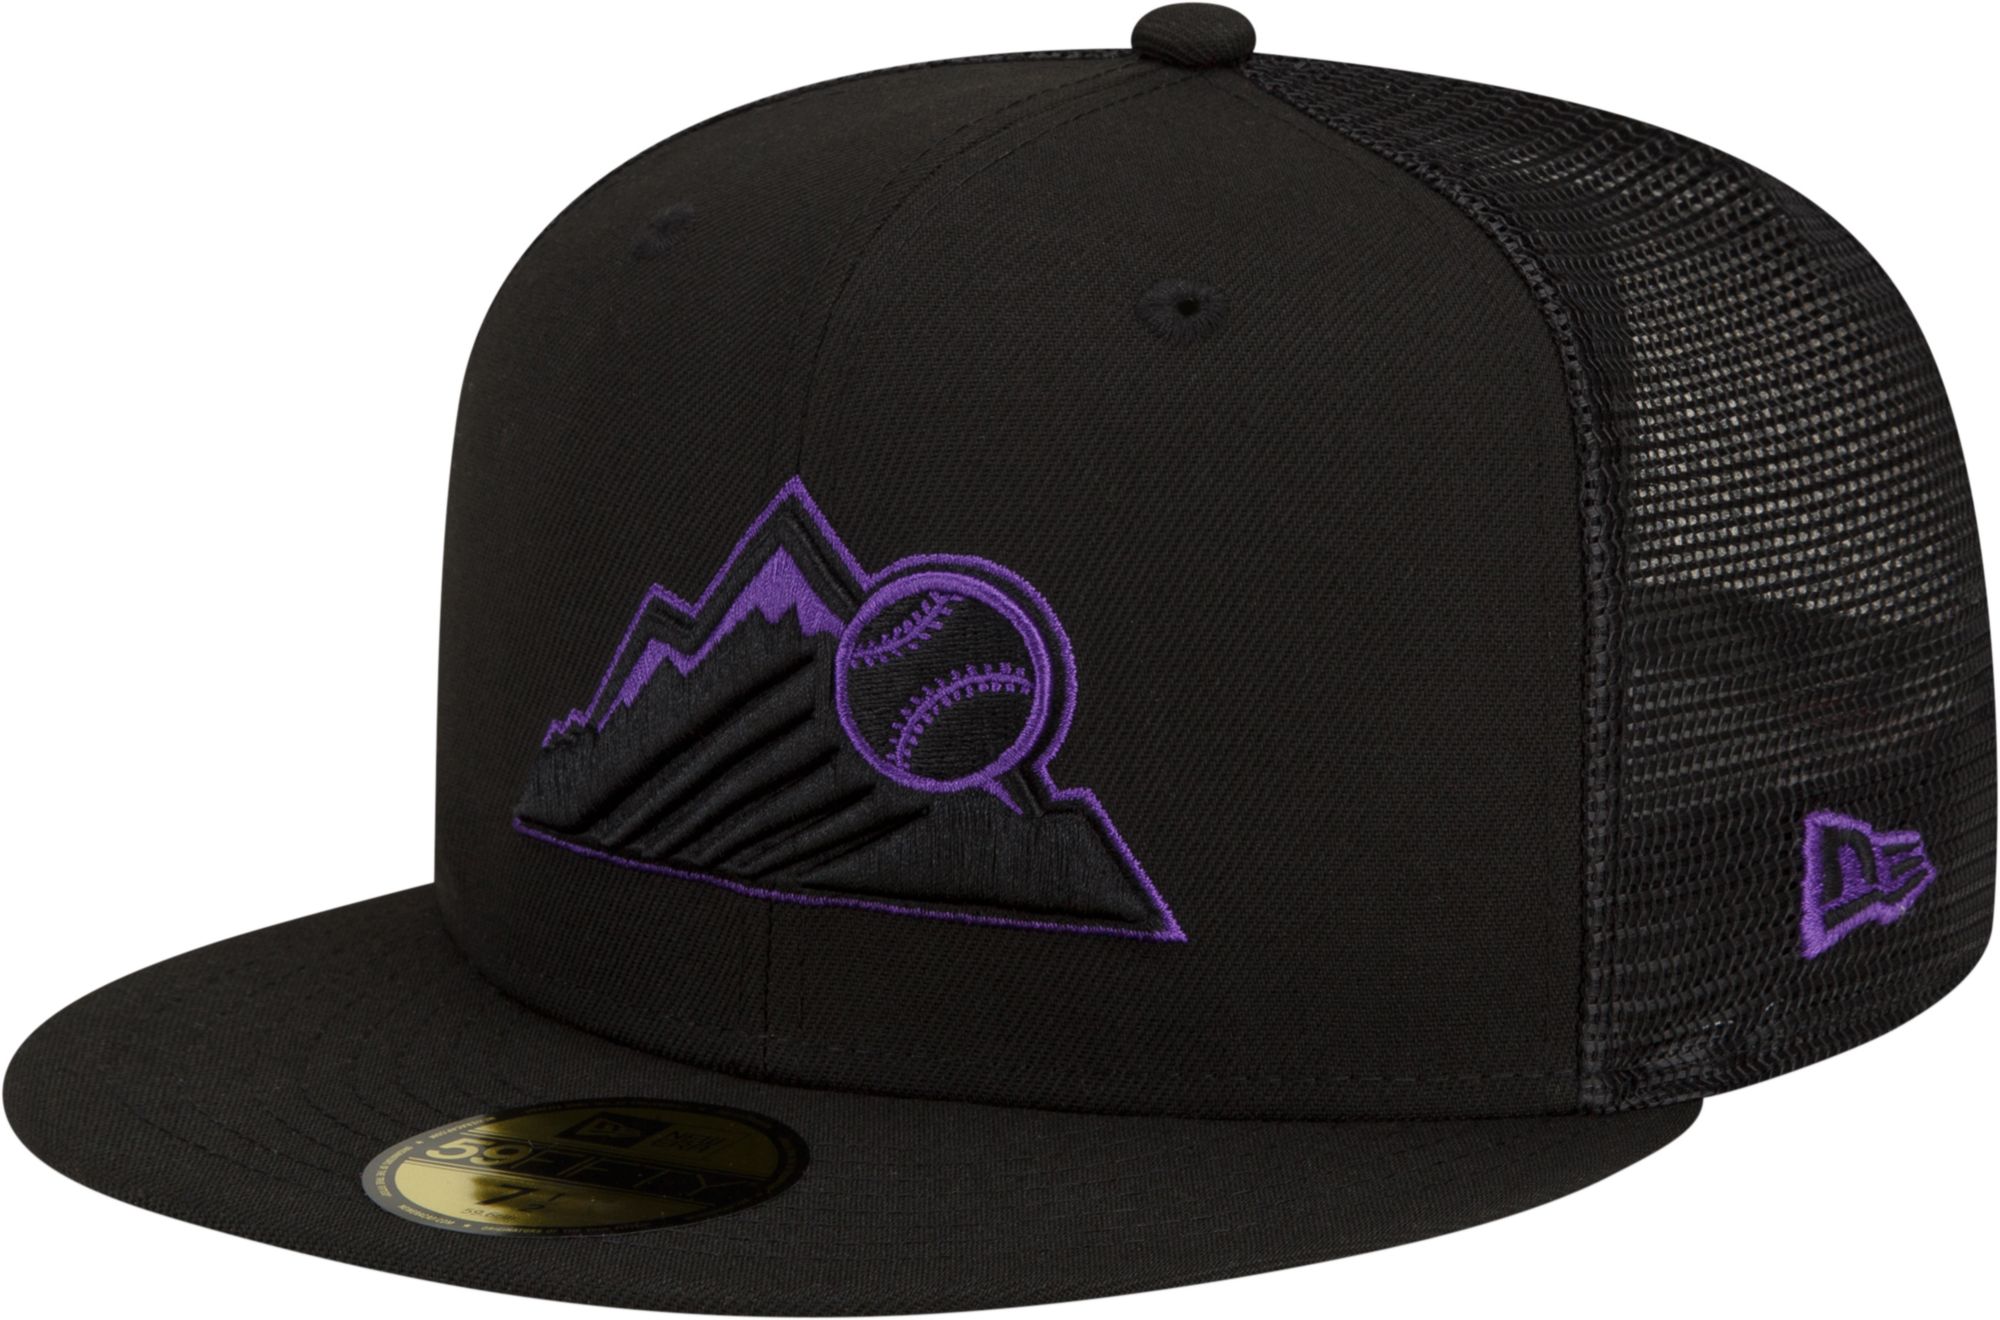 Colorado Rockies New Era authentic collection 4th of July 59fifty